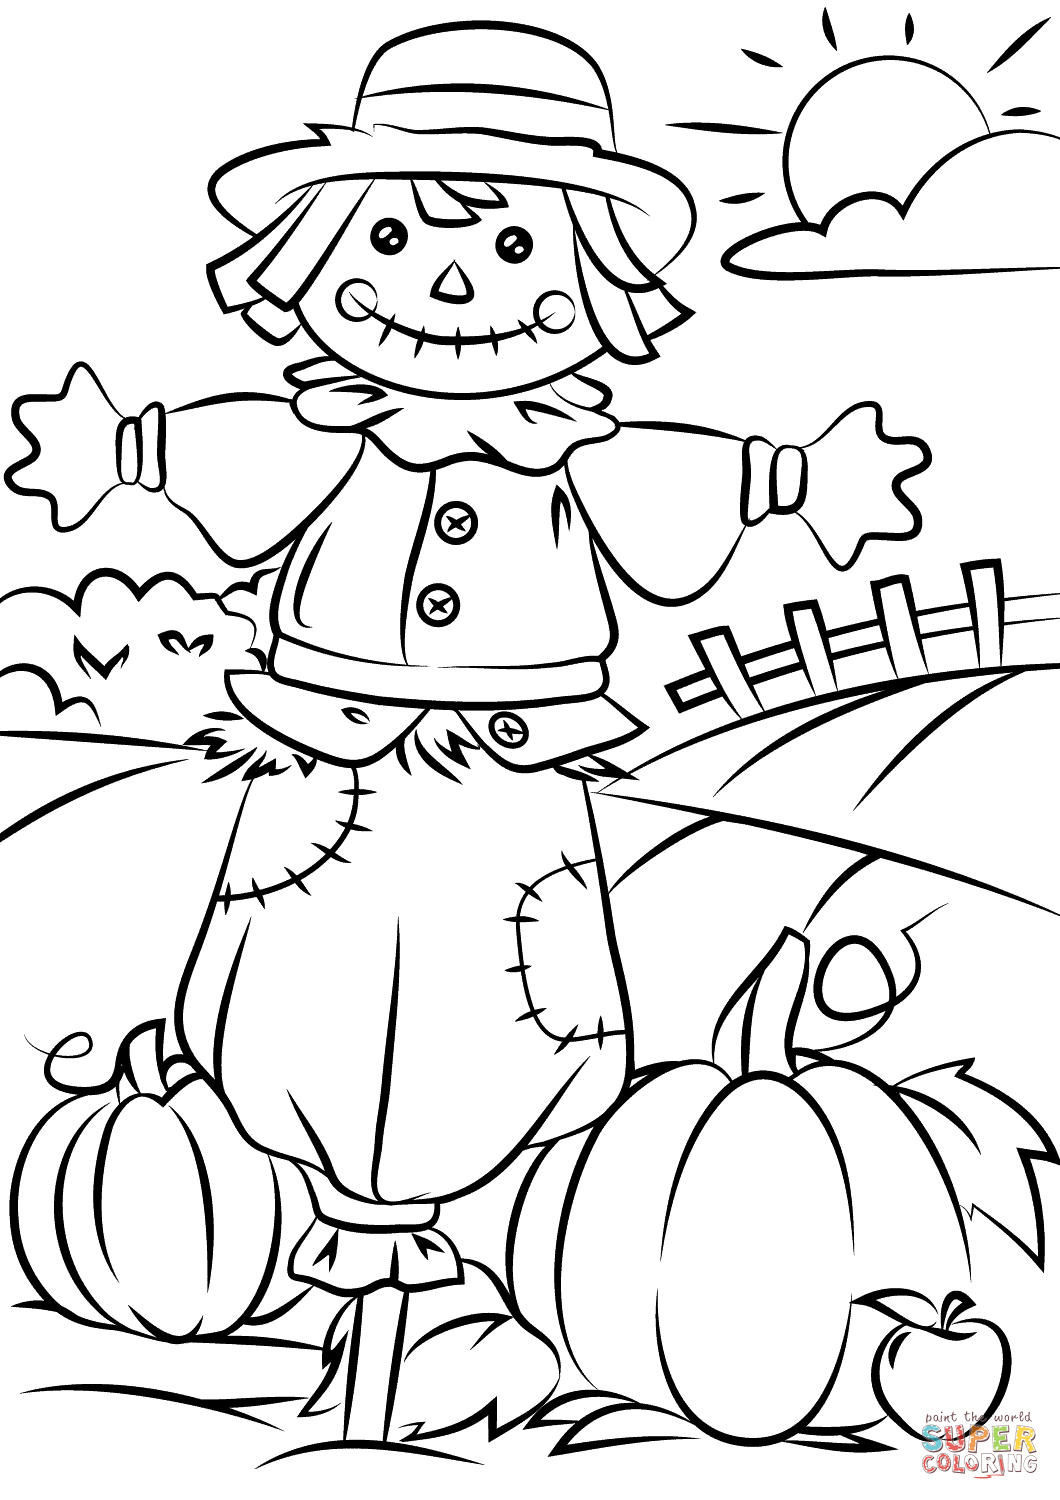 Coloring Pages Autumn Season Autumn Scene With Scarecrow Coloring Page Free Printable Coloring